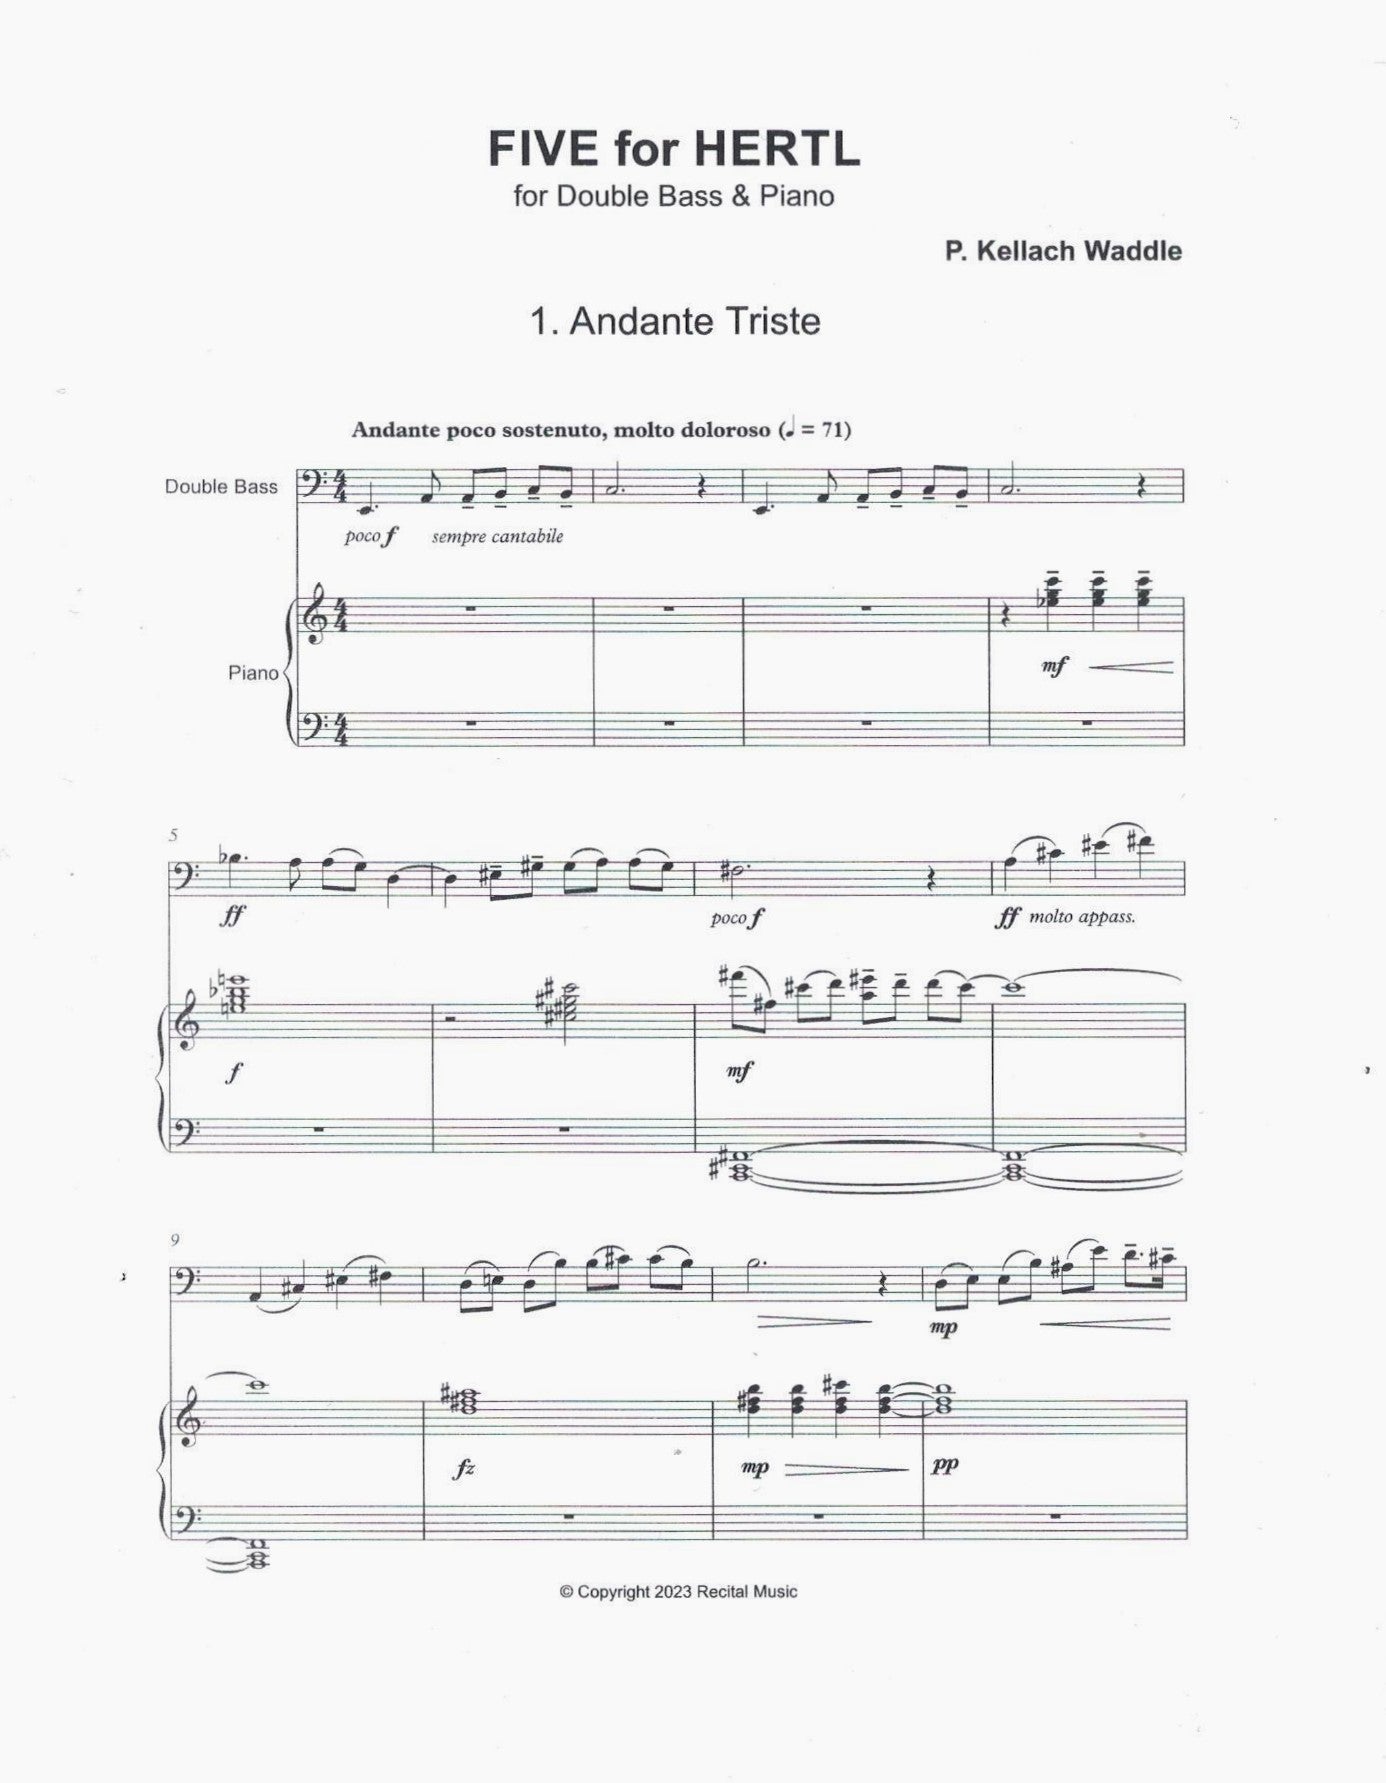 P. Kellach Waddle: Five for Hertl for double bass & piano